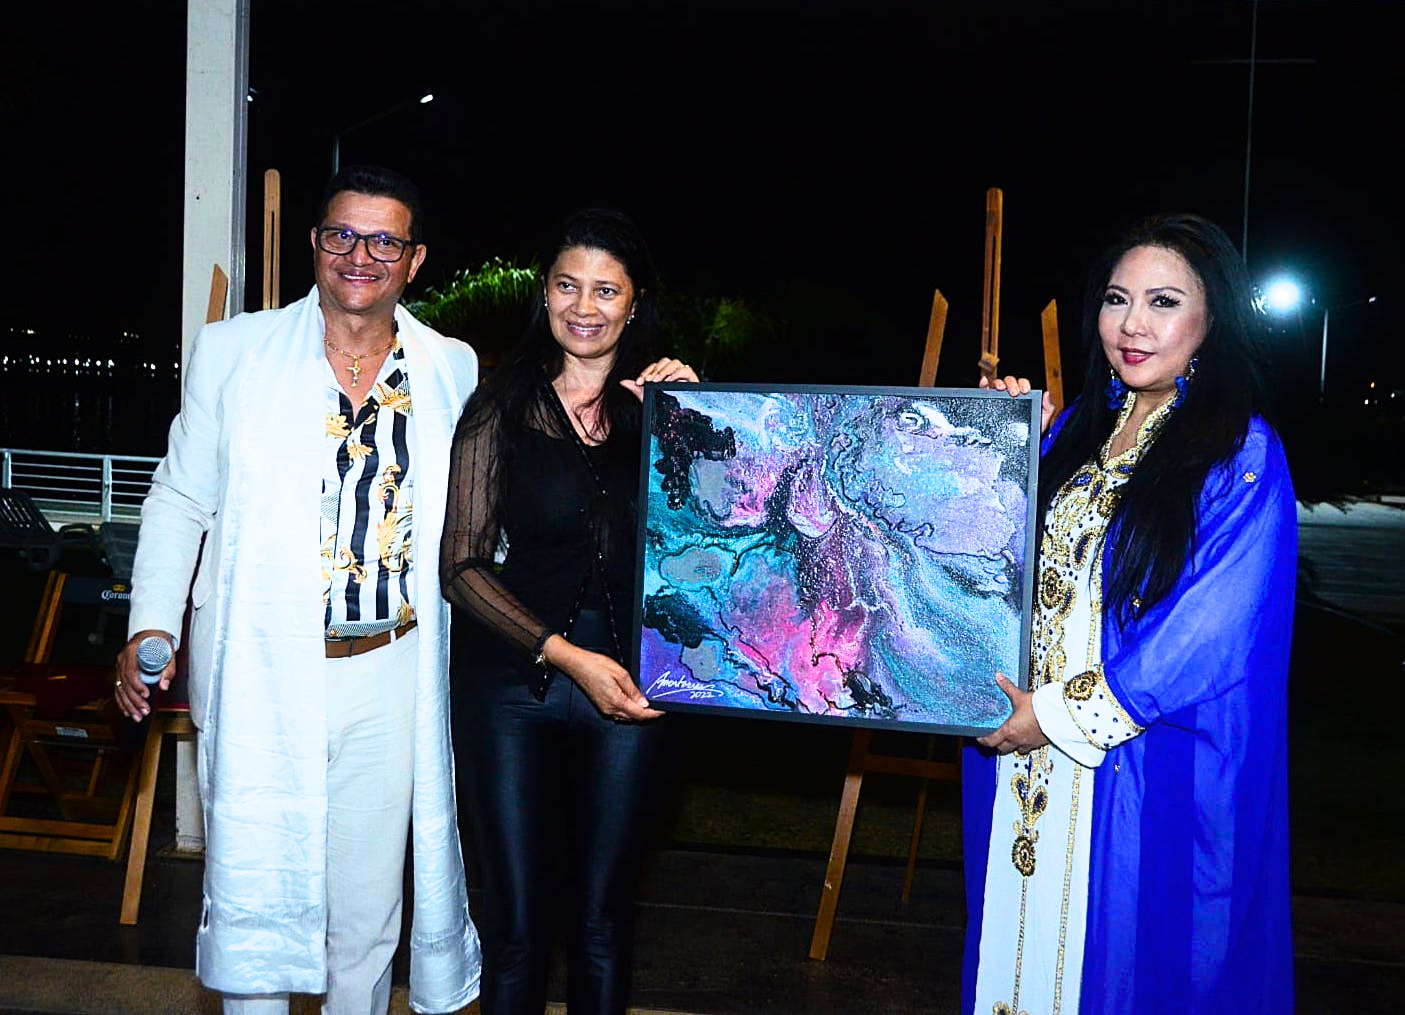 Amortorres Paintings Valued at USD10000 Sold at Art Auction in Brazil